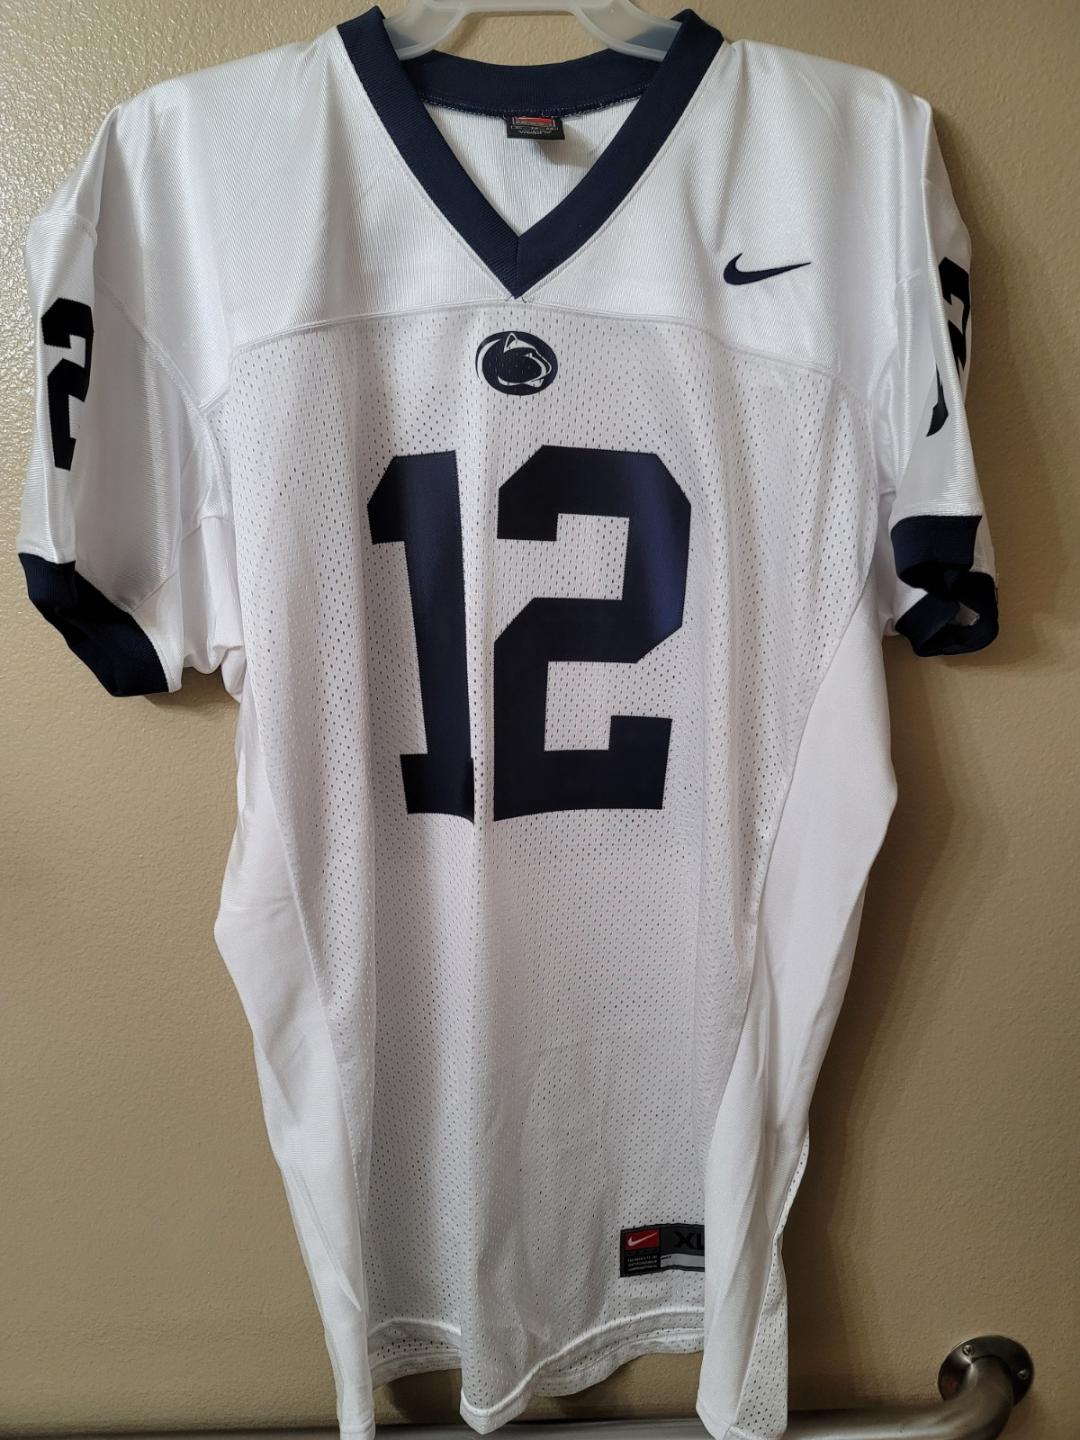 Mens Nike NCAA PENN STATE NITTANY LIONS PSU #12 AUTHENTIC Game JERSEY WHITE